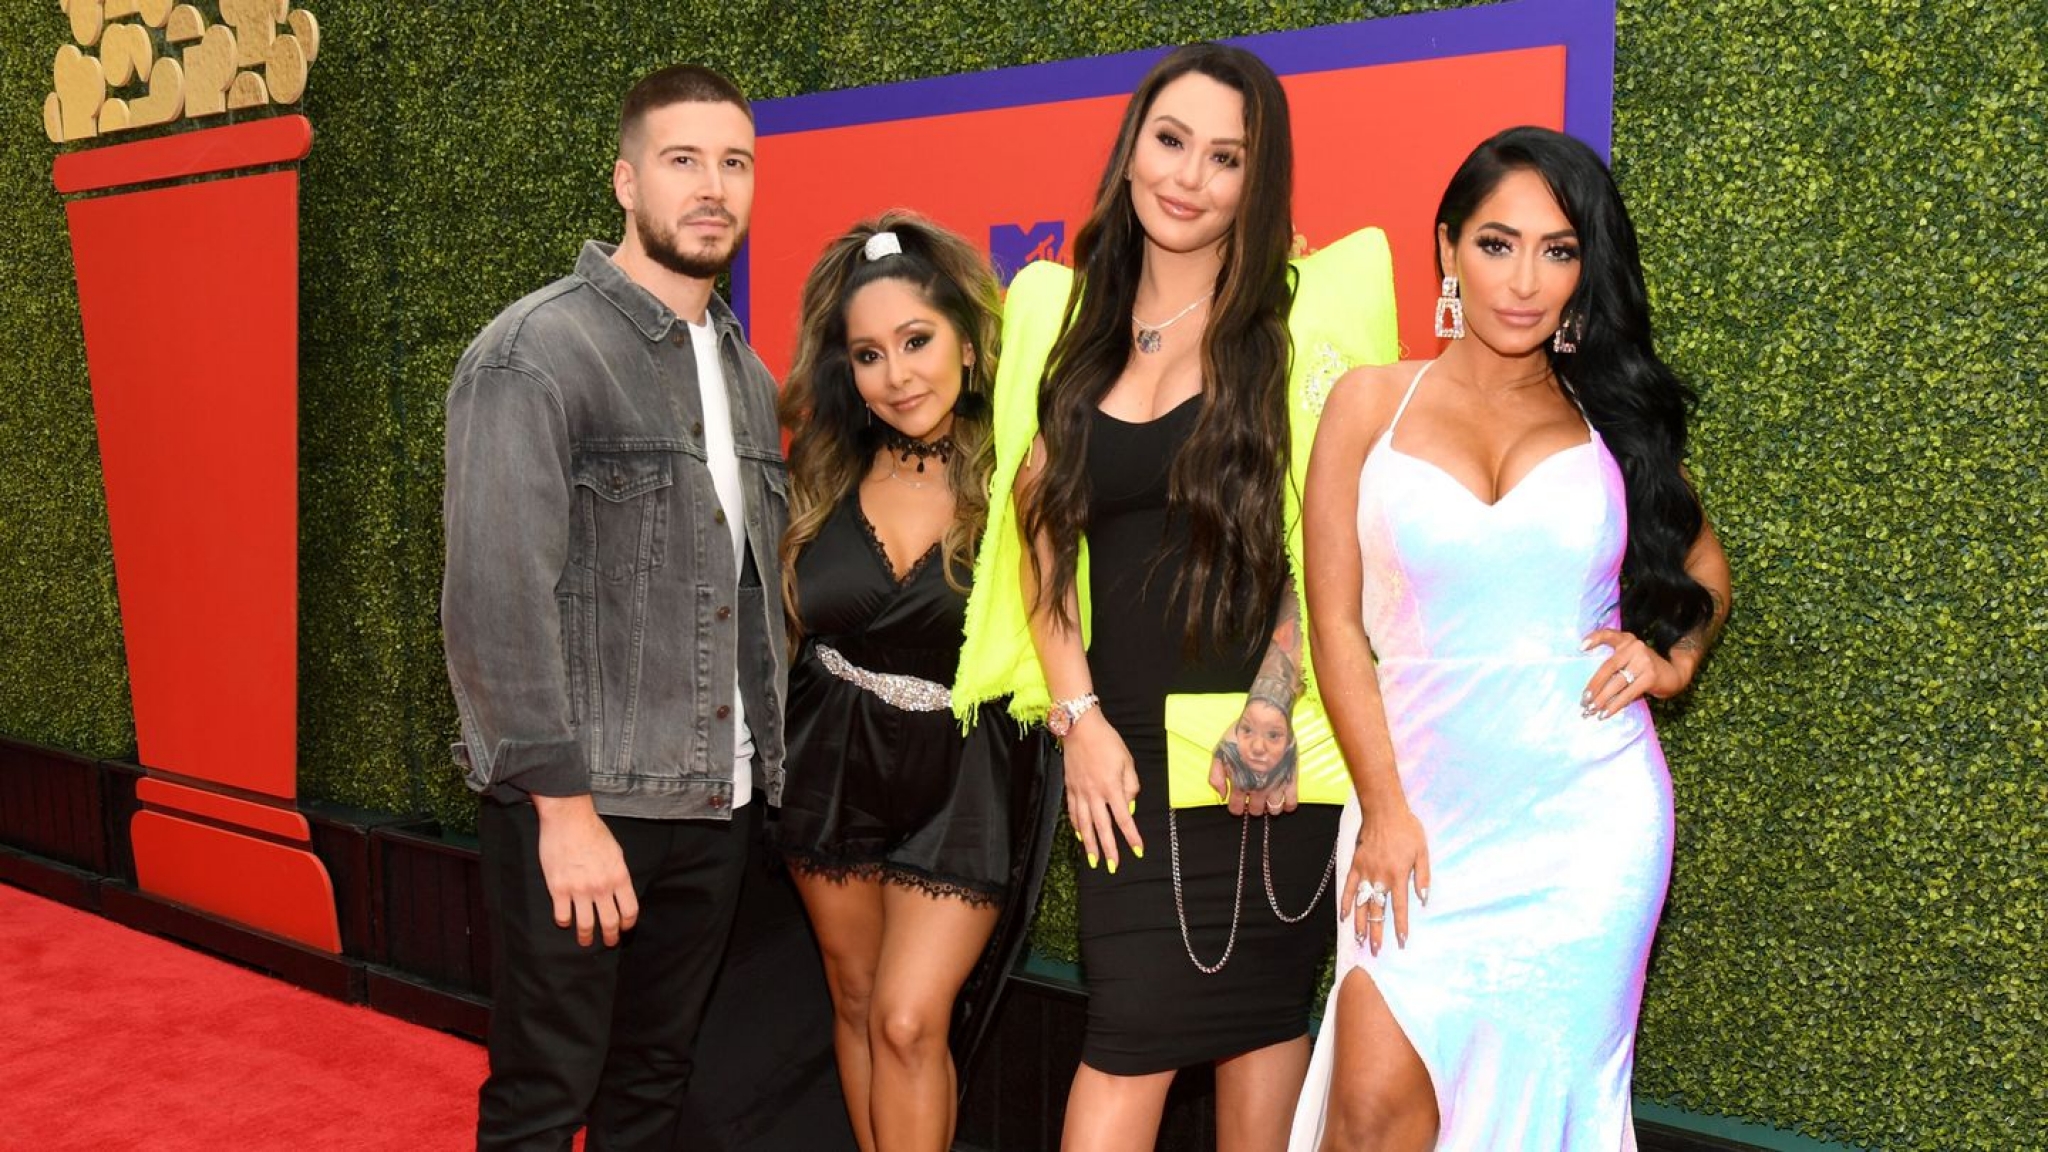 Jersey Shore: Family Vacation Is Reality Royalty At The MTV Movie & TV Awards: Unscripted